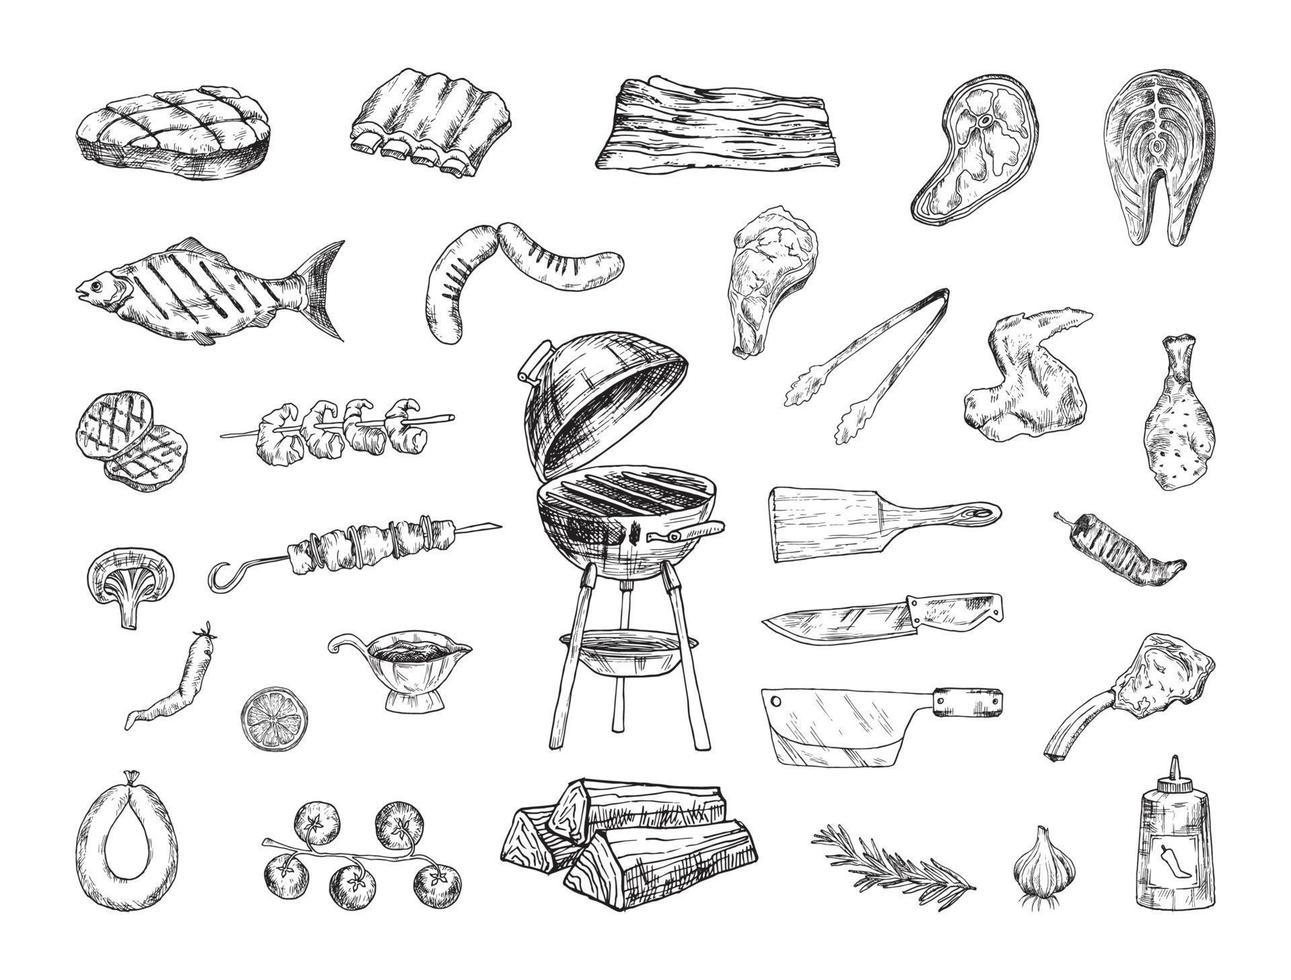 Barbecue Illustrations in Art Ink Style vector